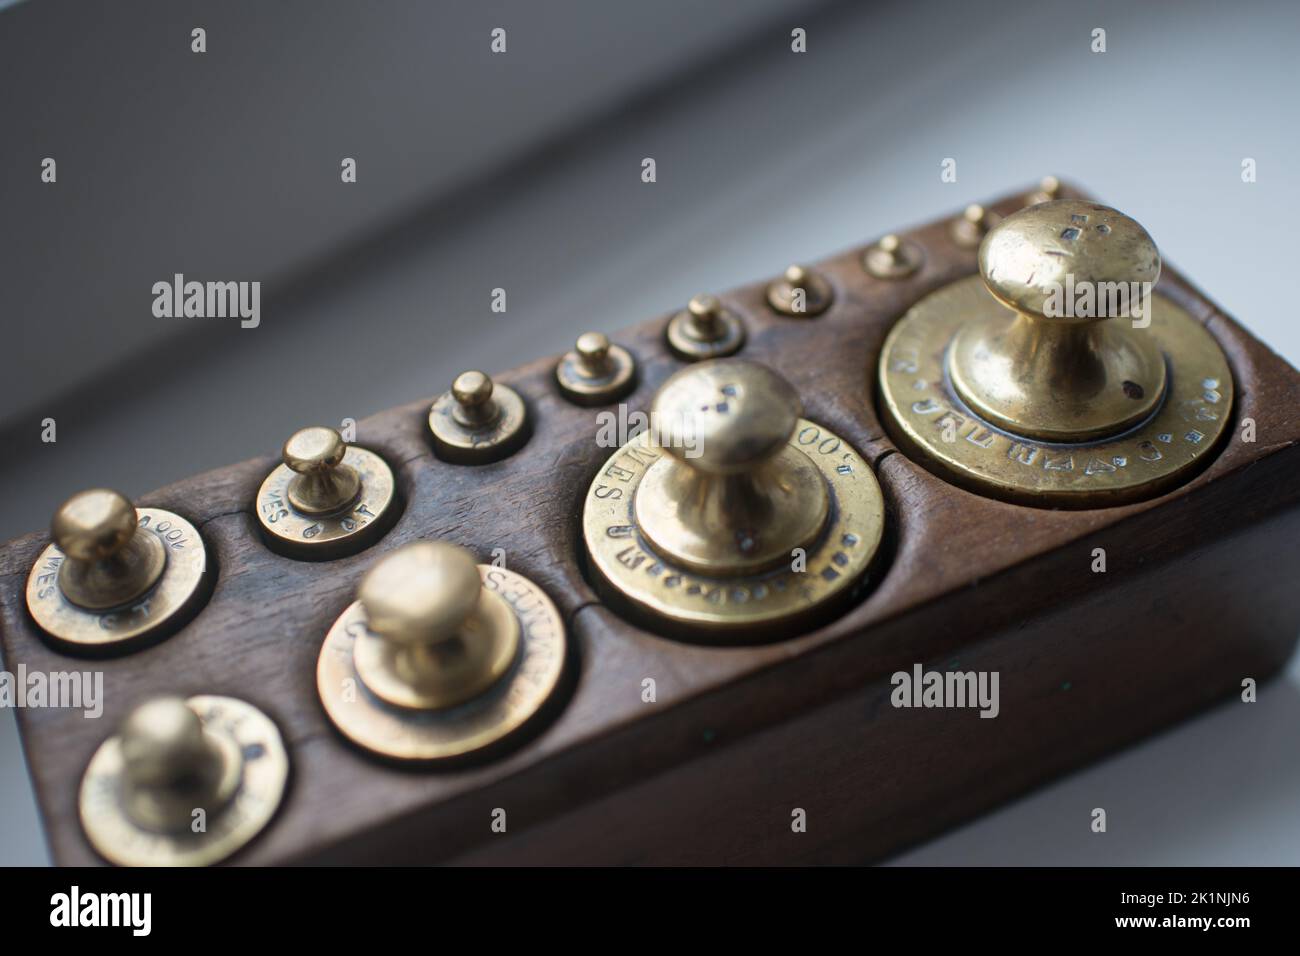 Set of golden traditional weights in a wooden box seen from above Stock Photo